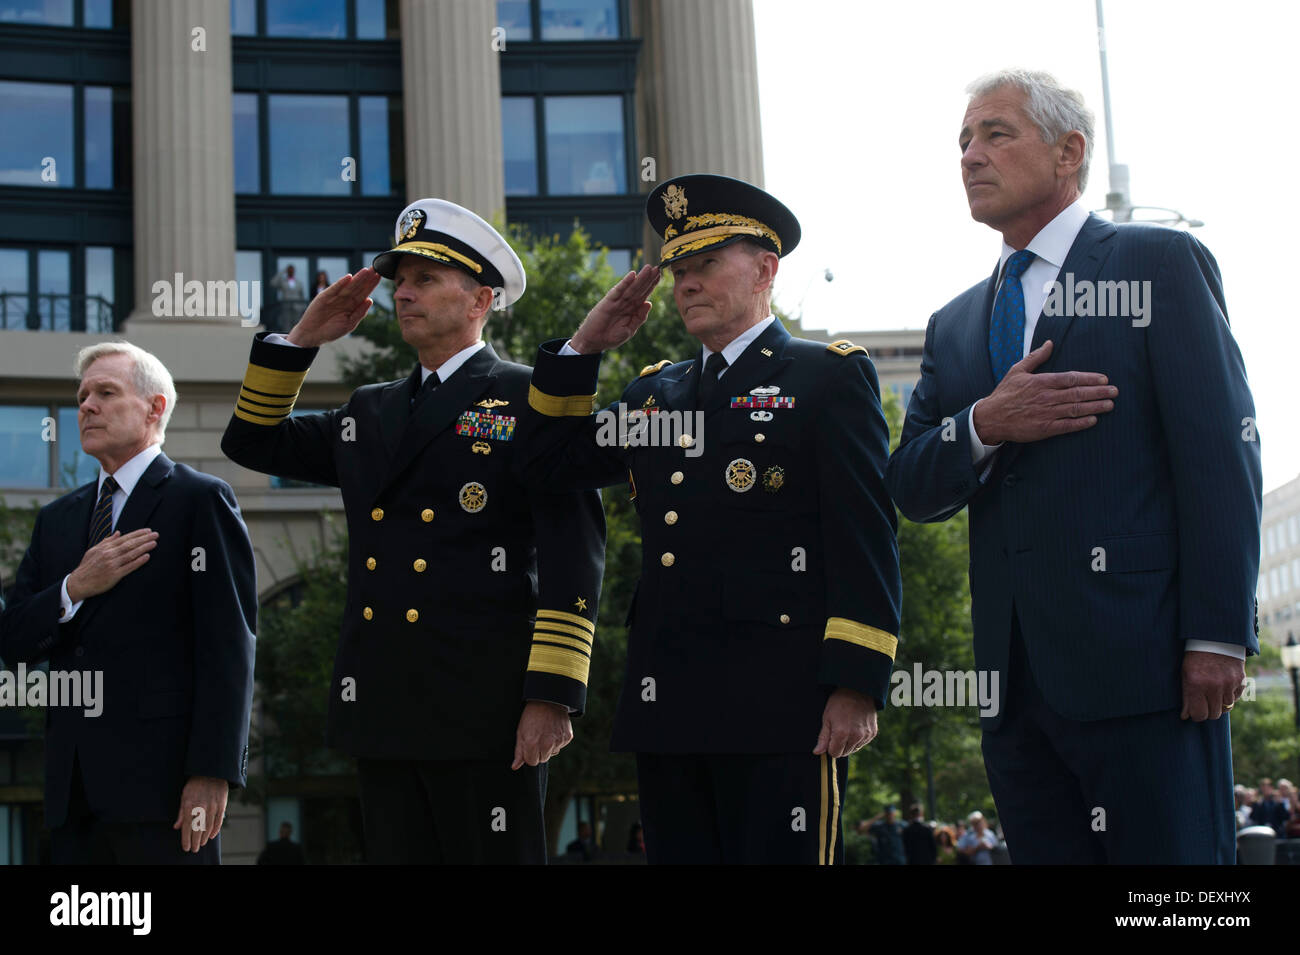 Secretary of Defense Chuck Hagel and Chairman of the Joint Chiefs of Staff Gen. Martin Dempsey stand with Chief of Naval Operations Adm. Jonathan Greenert and Secretary of the Navy Ray Mabus as taps is played during a wreath laying ceremony at the Navy Me Stock Photo